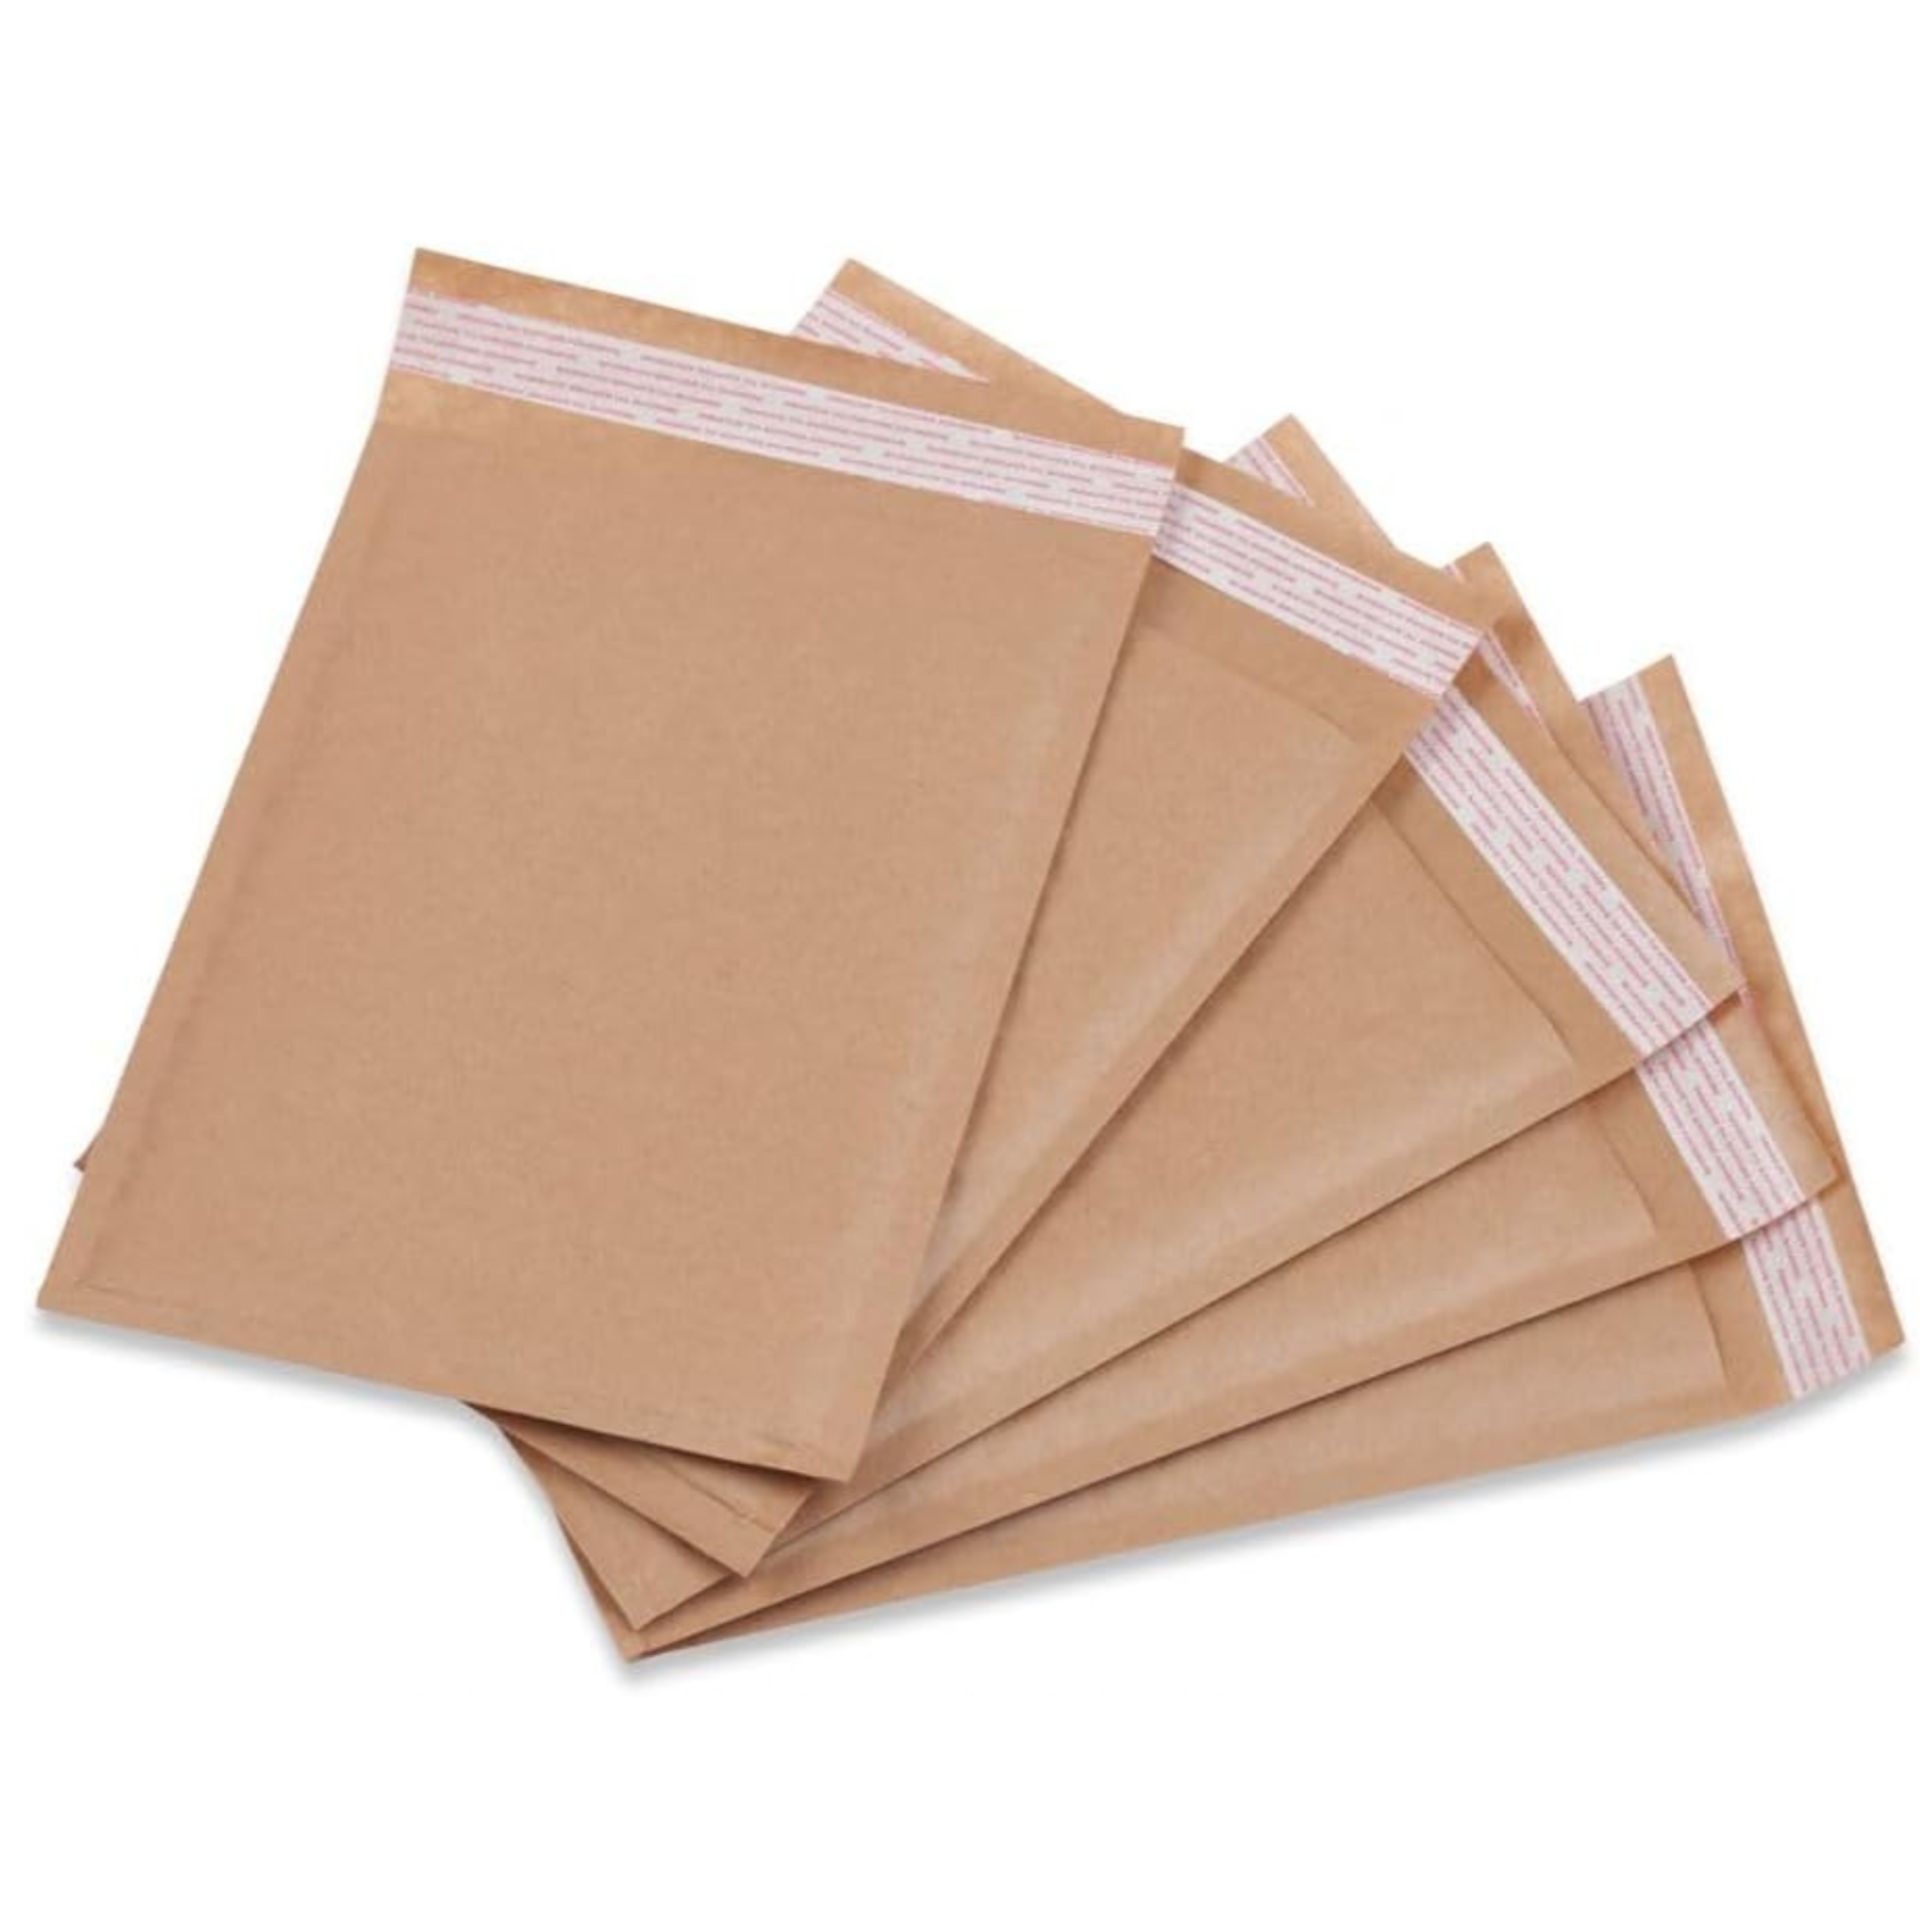 10 BOXES OF PAPER BAG ENVELOPES BUBBLE BAGS 100 PACK PEEL AND SEAL TOUGH LIGHT PADDED (120 X 165MM)